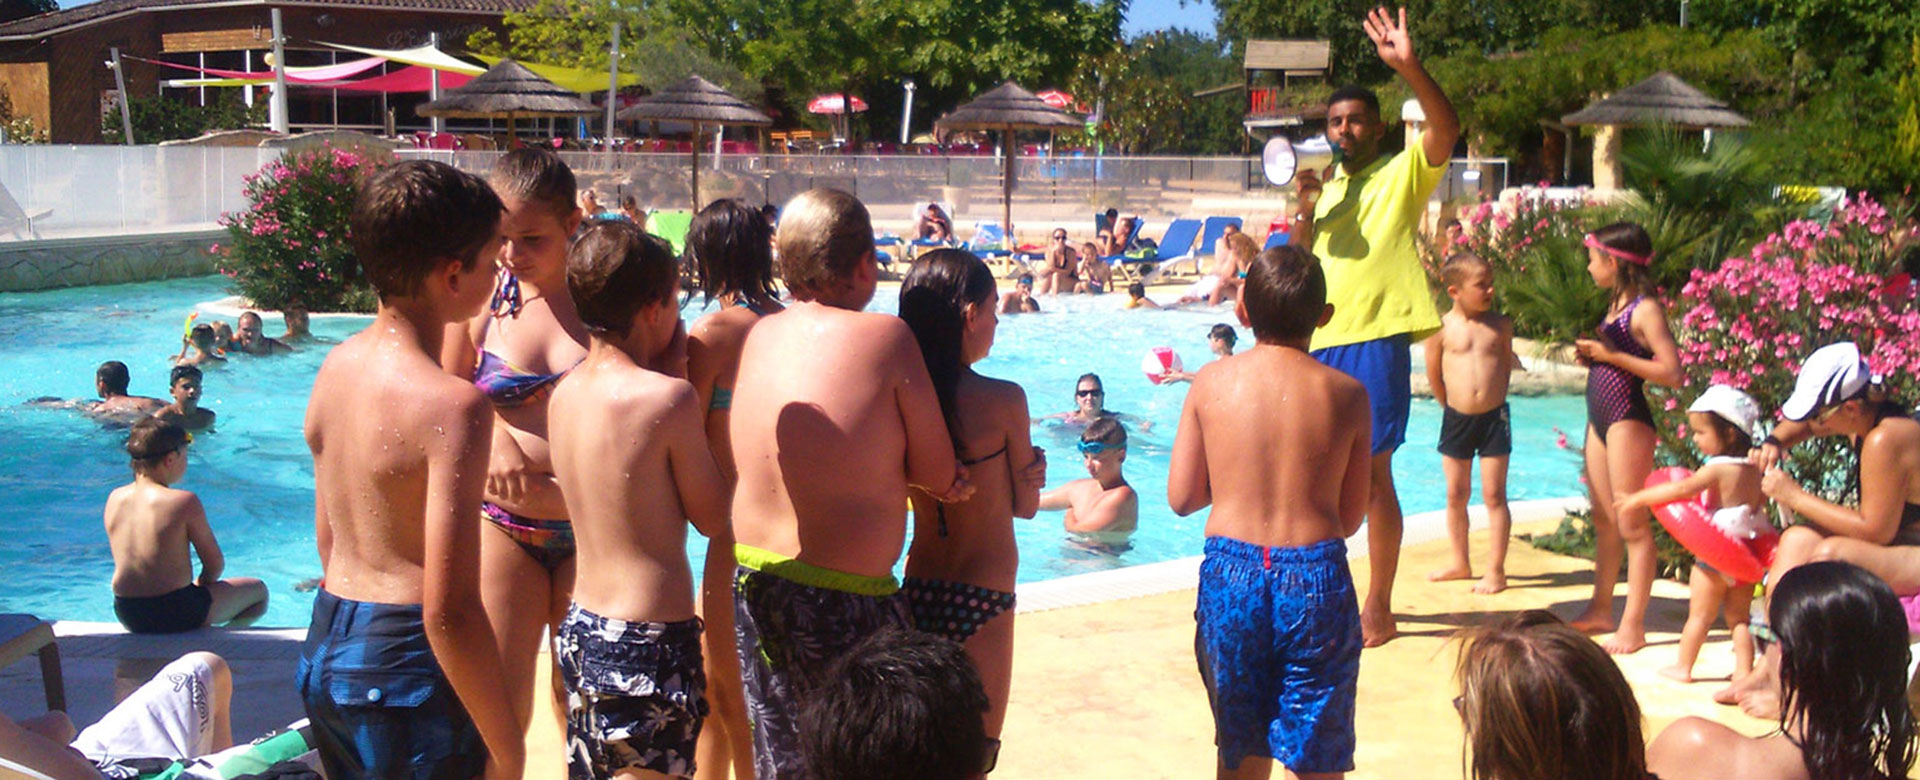 Aquatic area's activities at camping l'Évasion located in the Lot